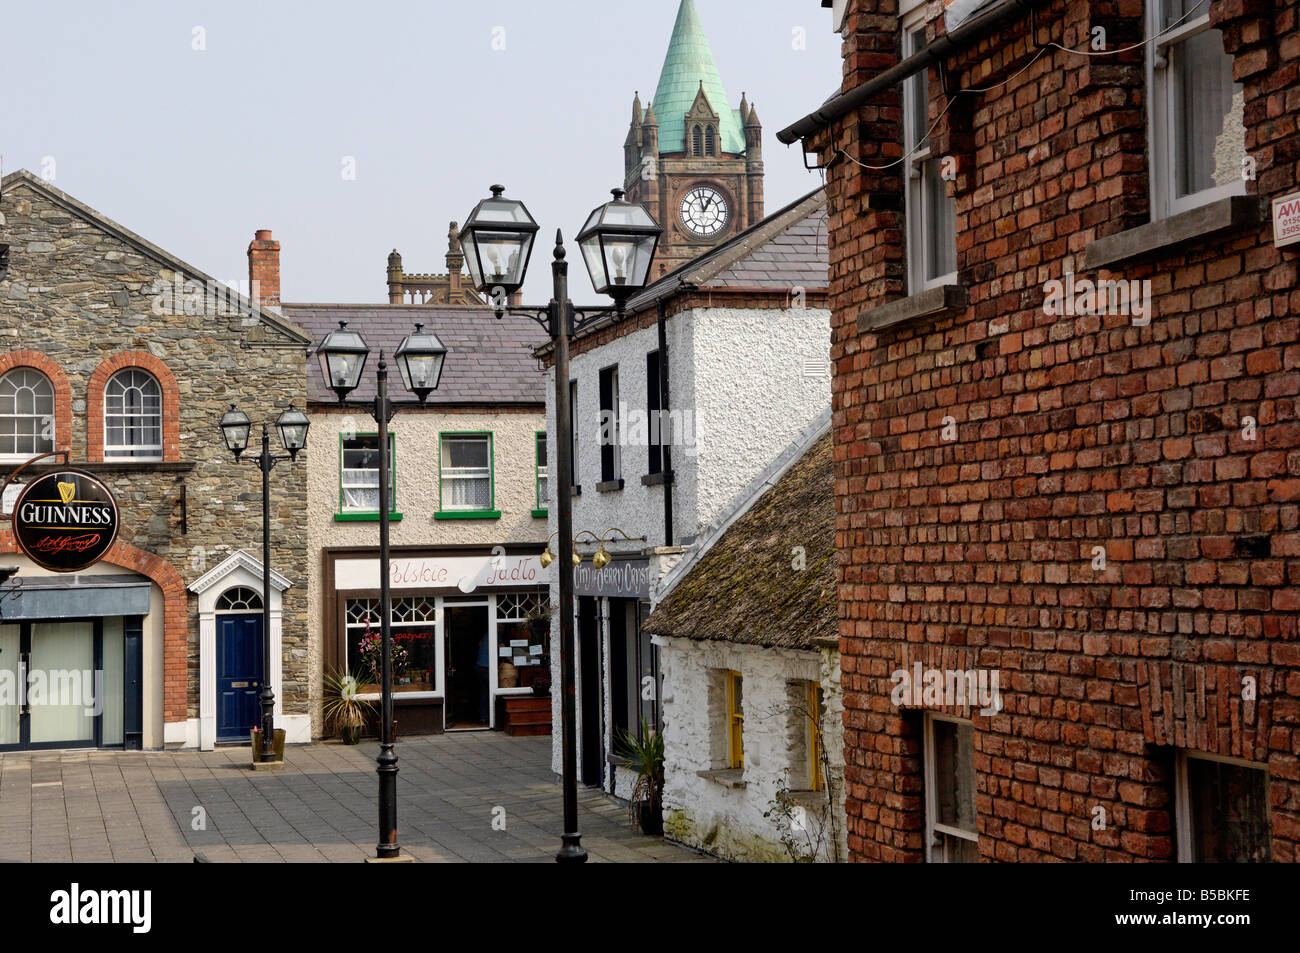 The Craft Village located between lower Shipquay Street and Magazine Street, City of Derry, Ulster, Northern Ireland, Stock Photo